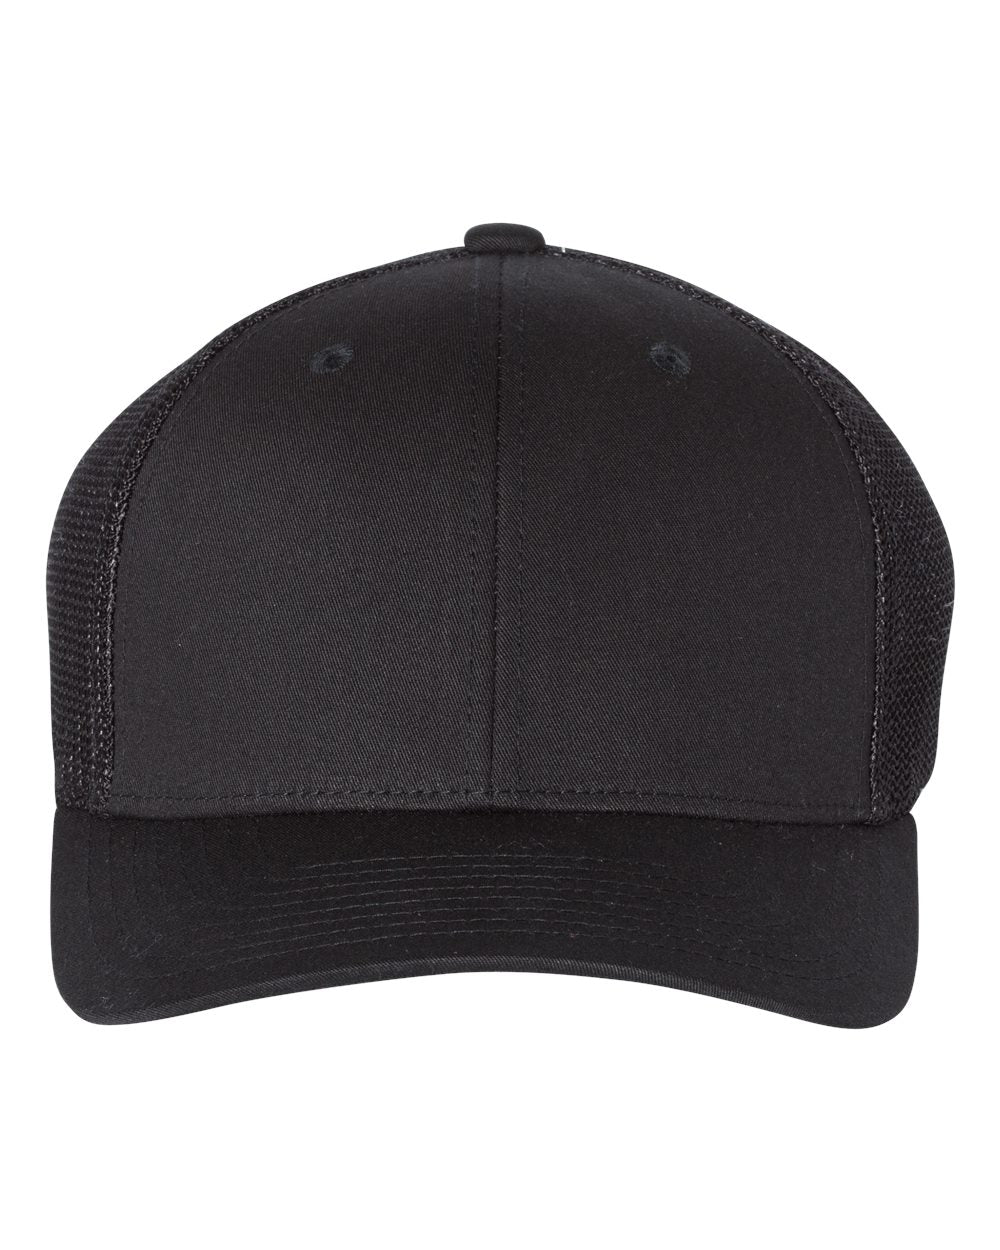 Richardson -110 Fitted Trucker with R-Flex Cap